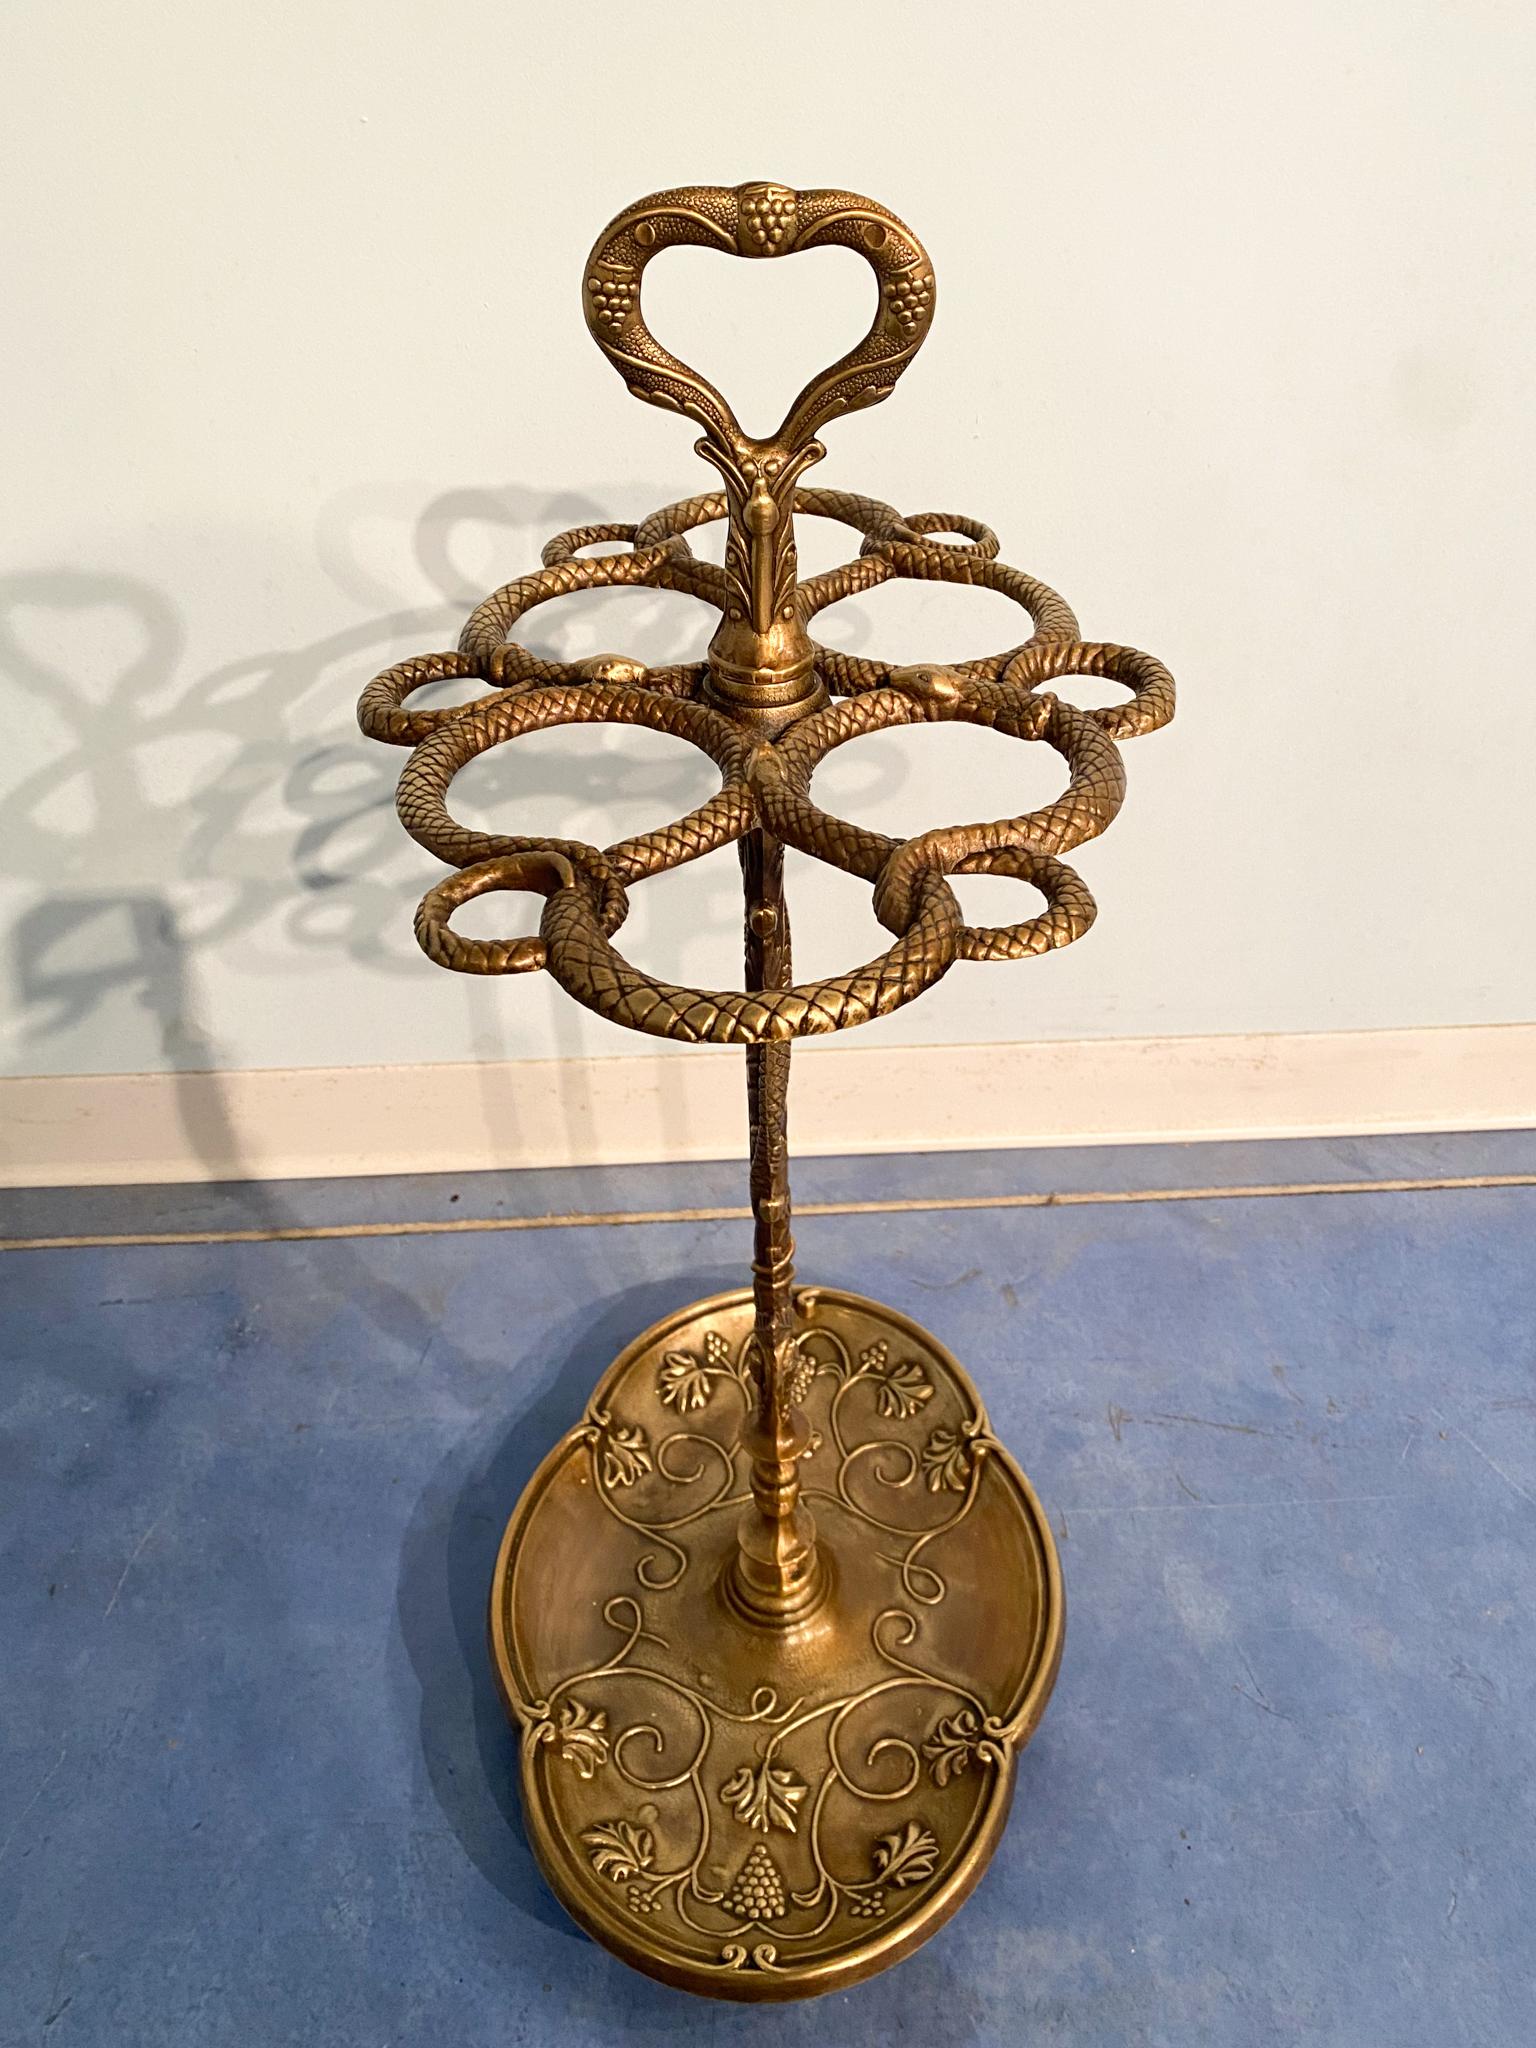 The beautiful Italian Art Nouveau Liberty umbrella stands from the 1950s has a great executive quality that is denoted by various details, the brass base decorated with Art Nouveau floral motifs, the central shaft has a splendid decoration and